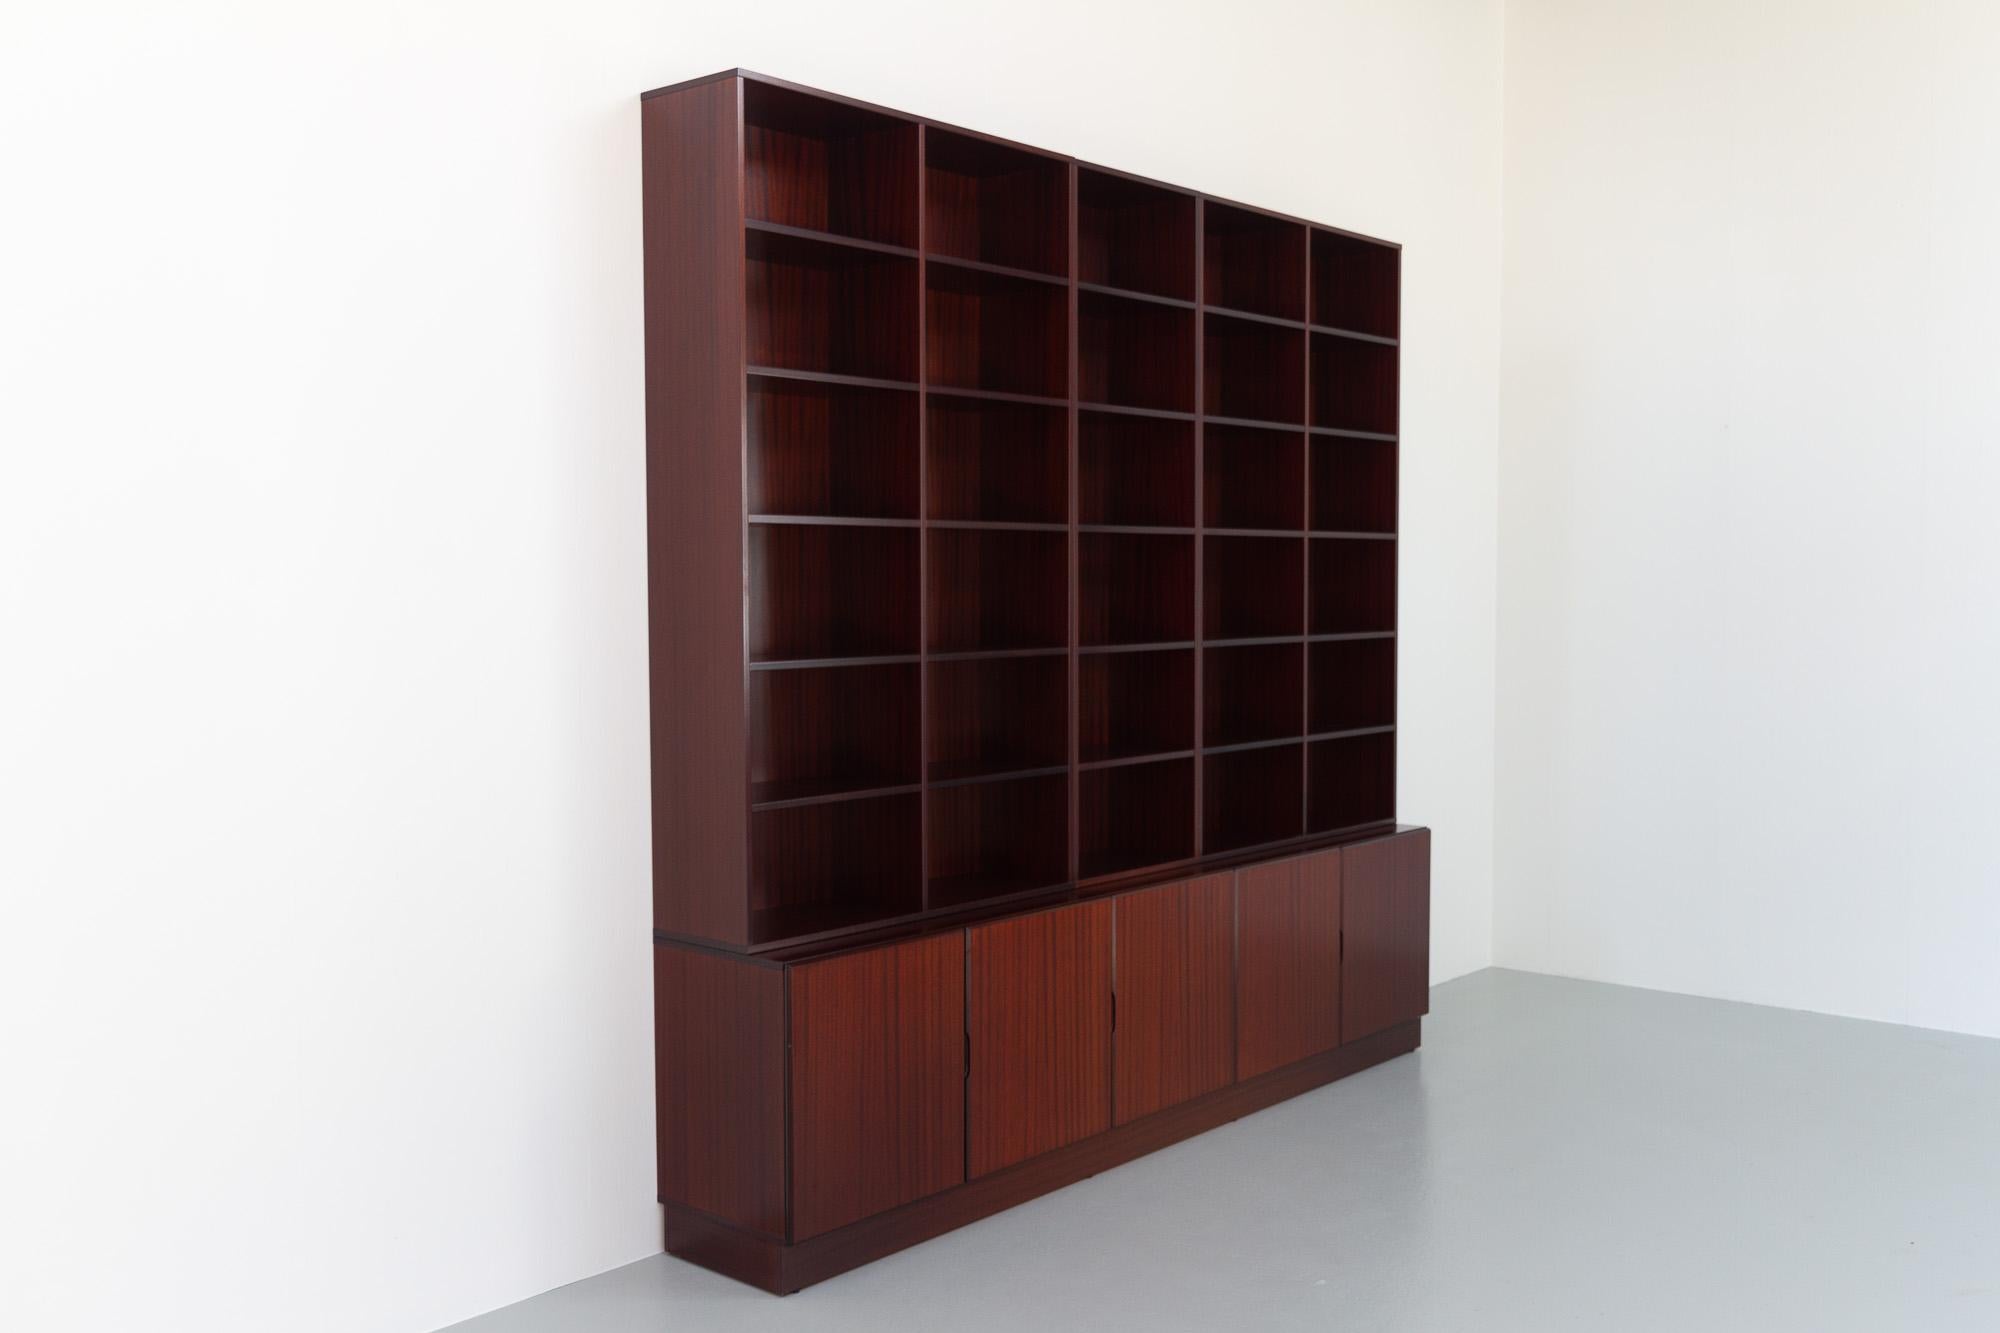 Vintage Danish Large Mahogany 5 Bay Bookcase, 1970s.
Large and impressive Scandinavian Modern 5 bay bookcase in Mahogany veneer. This three part Danish library with plenty of storage space is composed of three cabinets and three bookcases and one